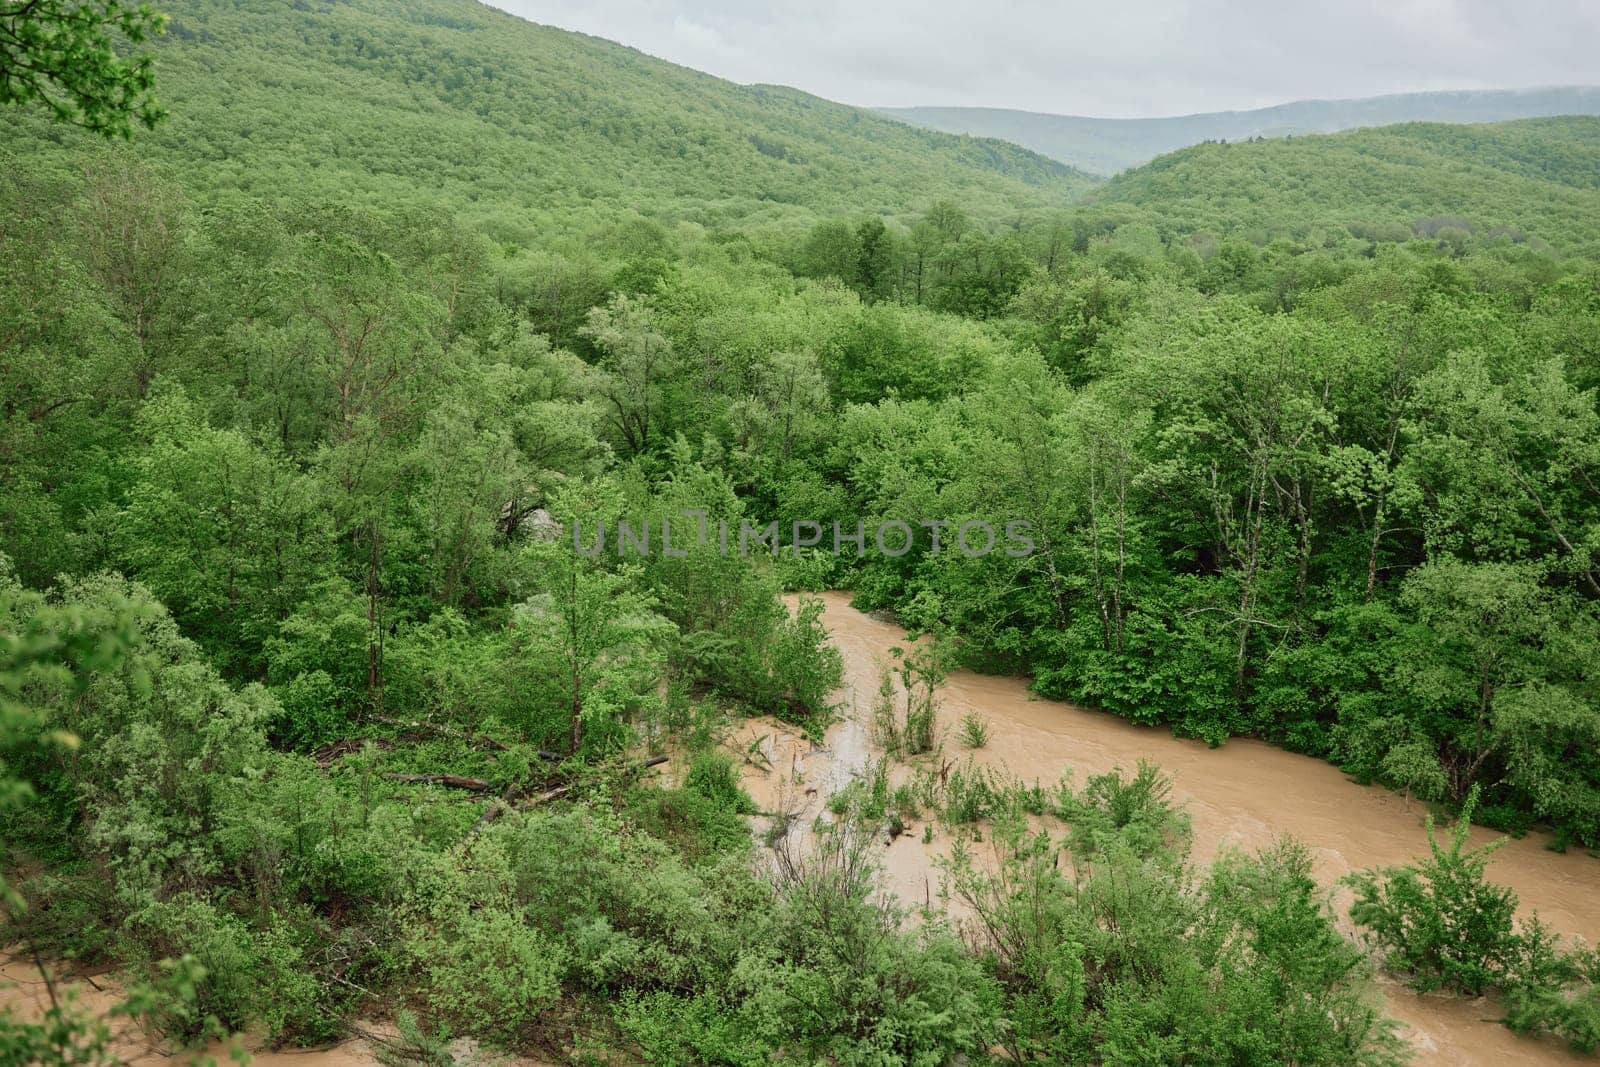 mountain river after rain flows in a forest area. High quality photo